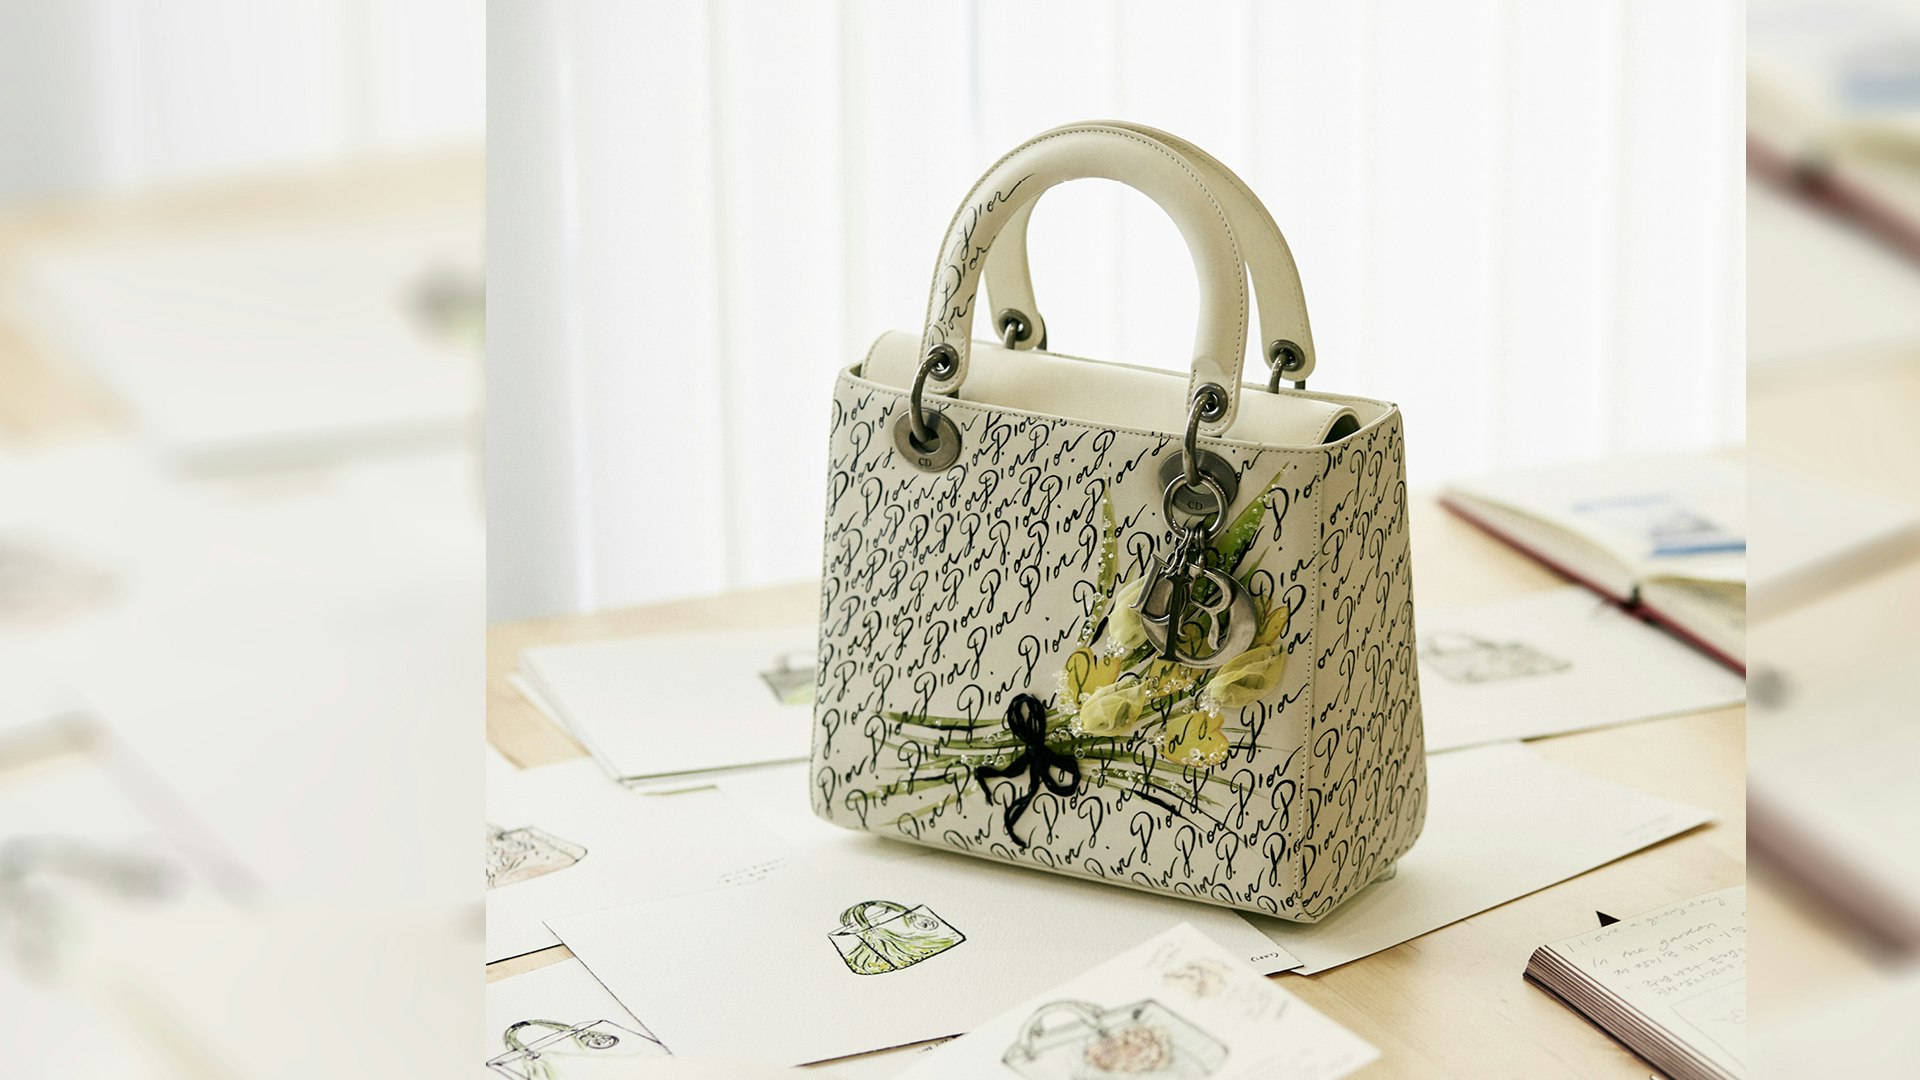 Dior Enlists 11 Women Artists to Create Chic New Handbag Collection -  Galerie